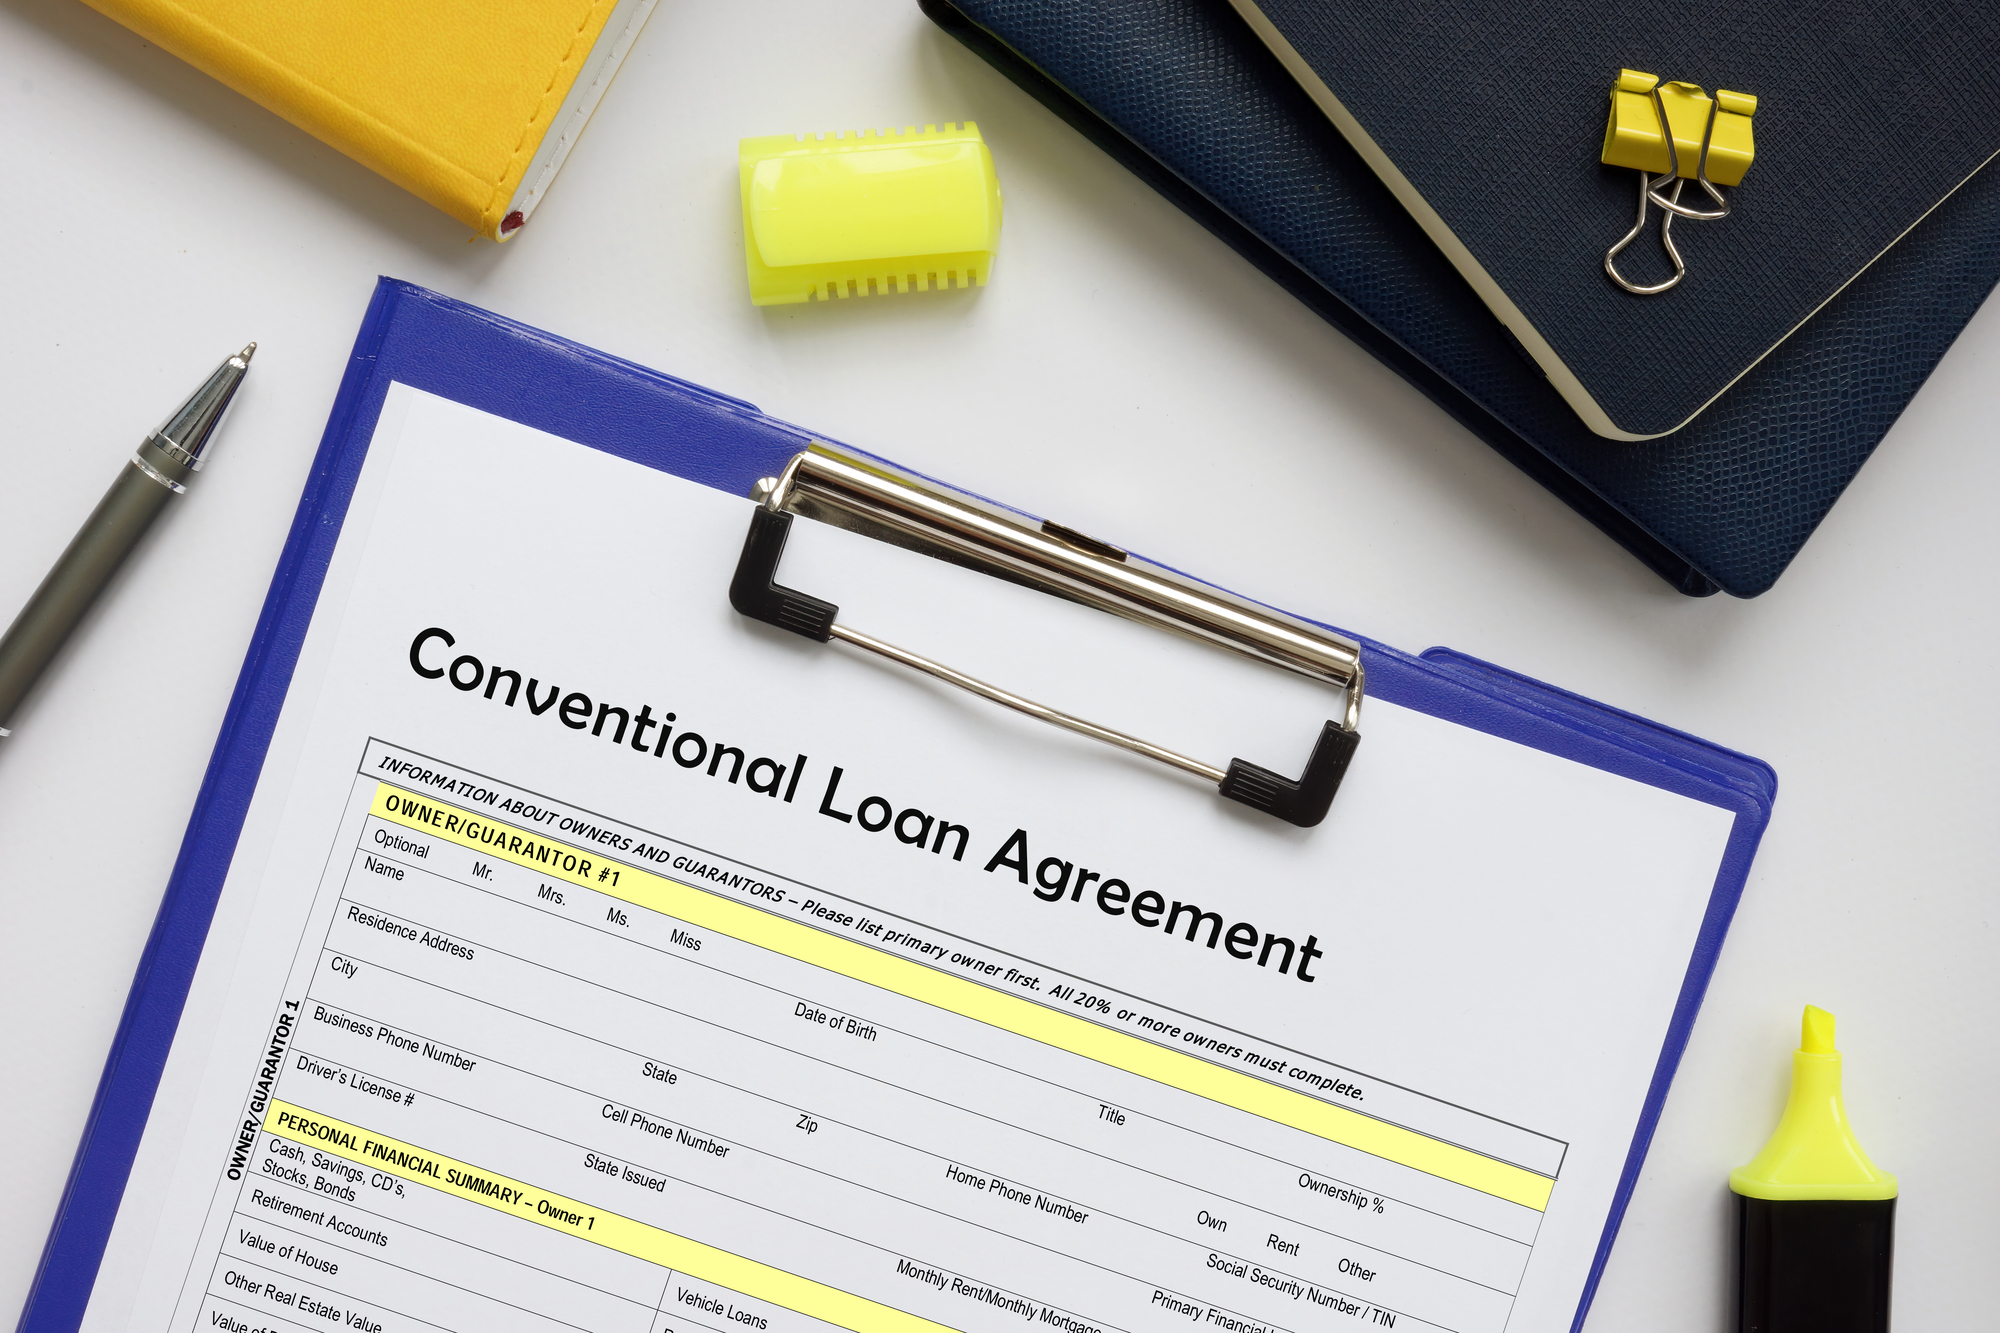 Conventional Loan Agreement sign on the bank form